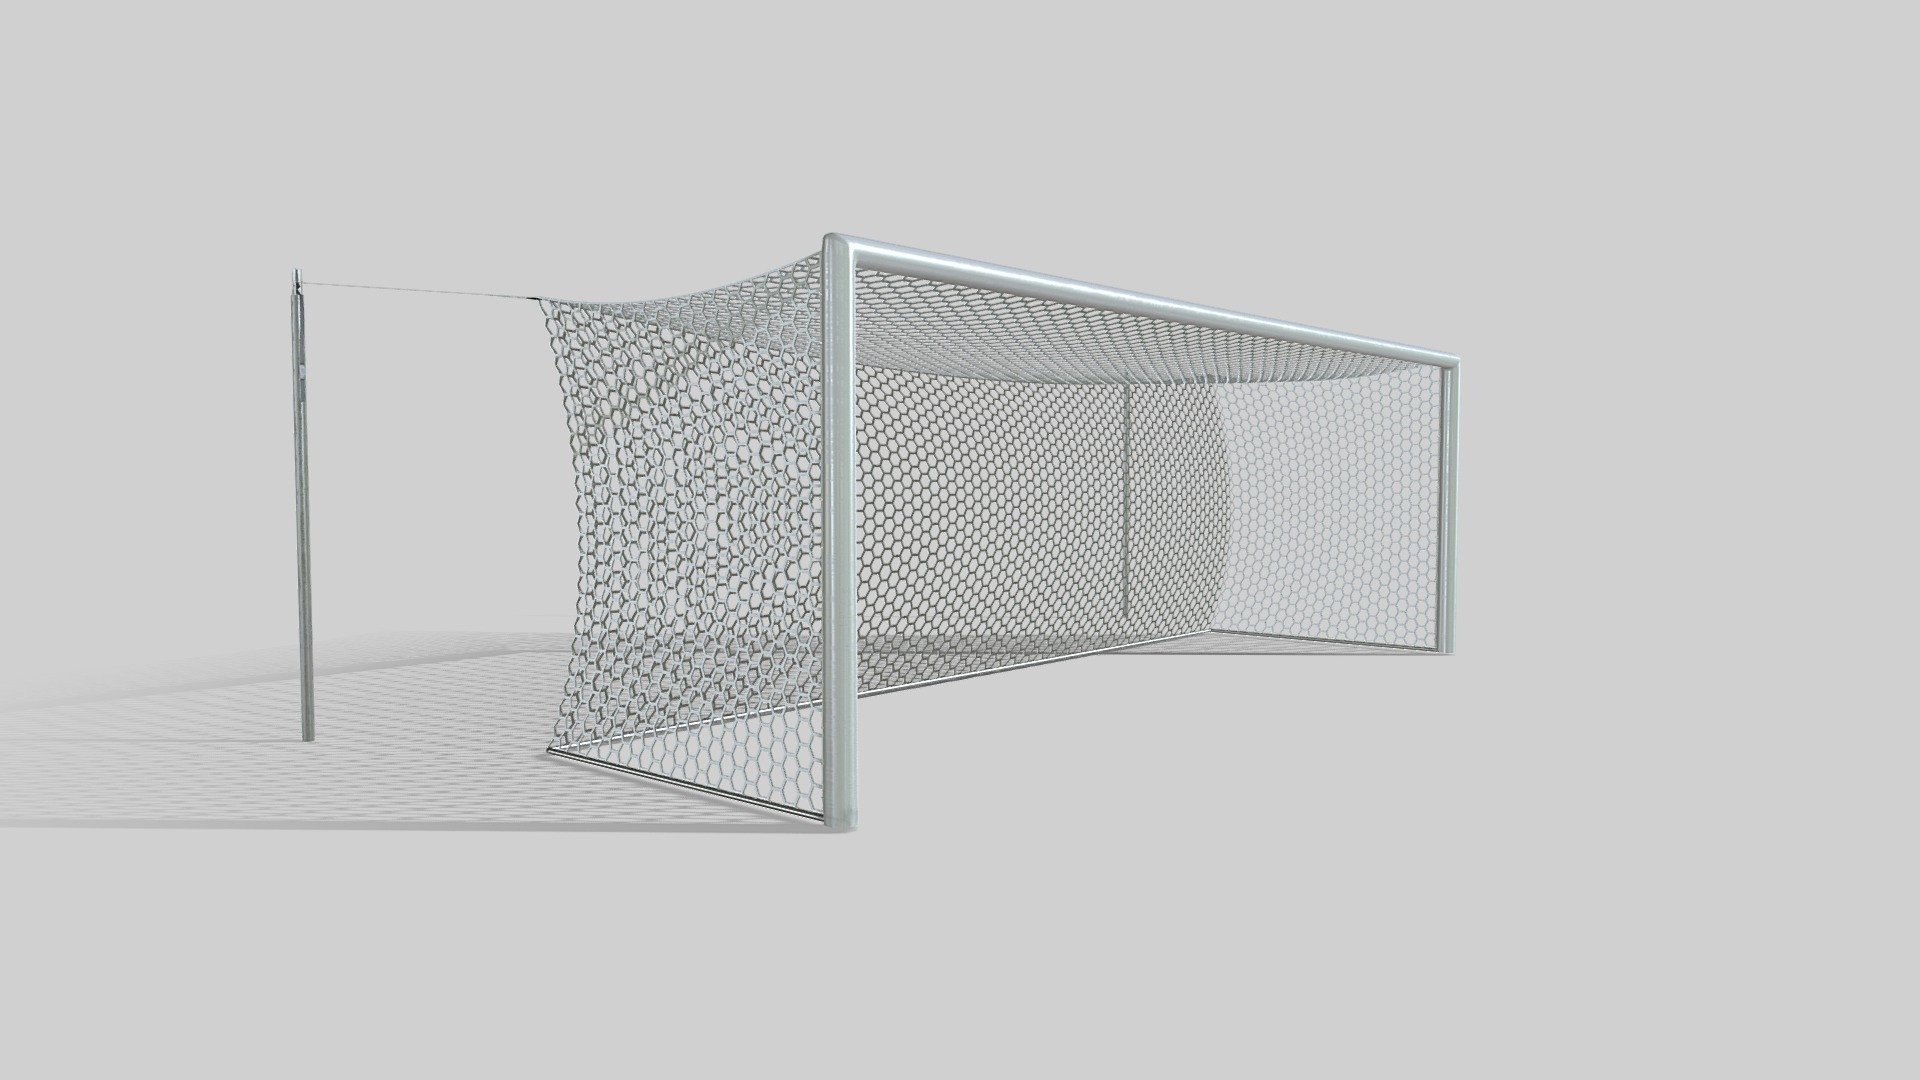 Modern Style Football goal with modelled hexagon wire.

Net Colors: White, Green, Black, Grey

Use subdivide for higher geometry. You can animate the net, it’s one object without elements.

Used maps: Base, Reflect, Glossiness, Normal

The bar, case is Unwrapped, Net is 600x600x600 UVW Mapped

FBX File downloadable 3d model